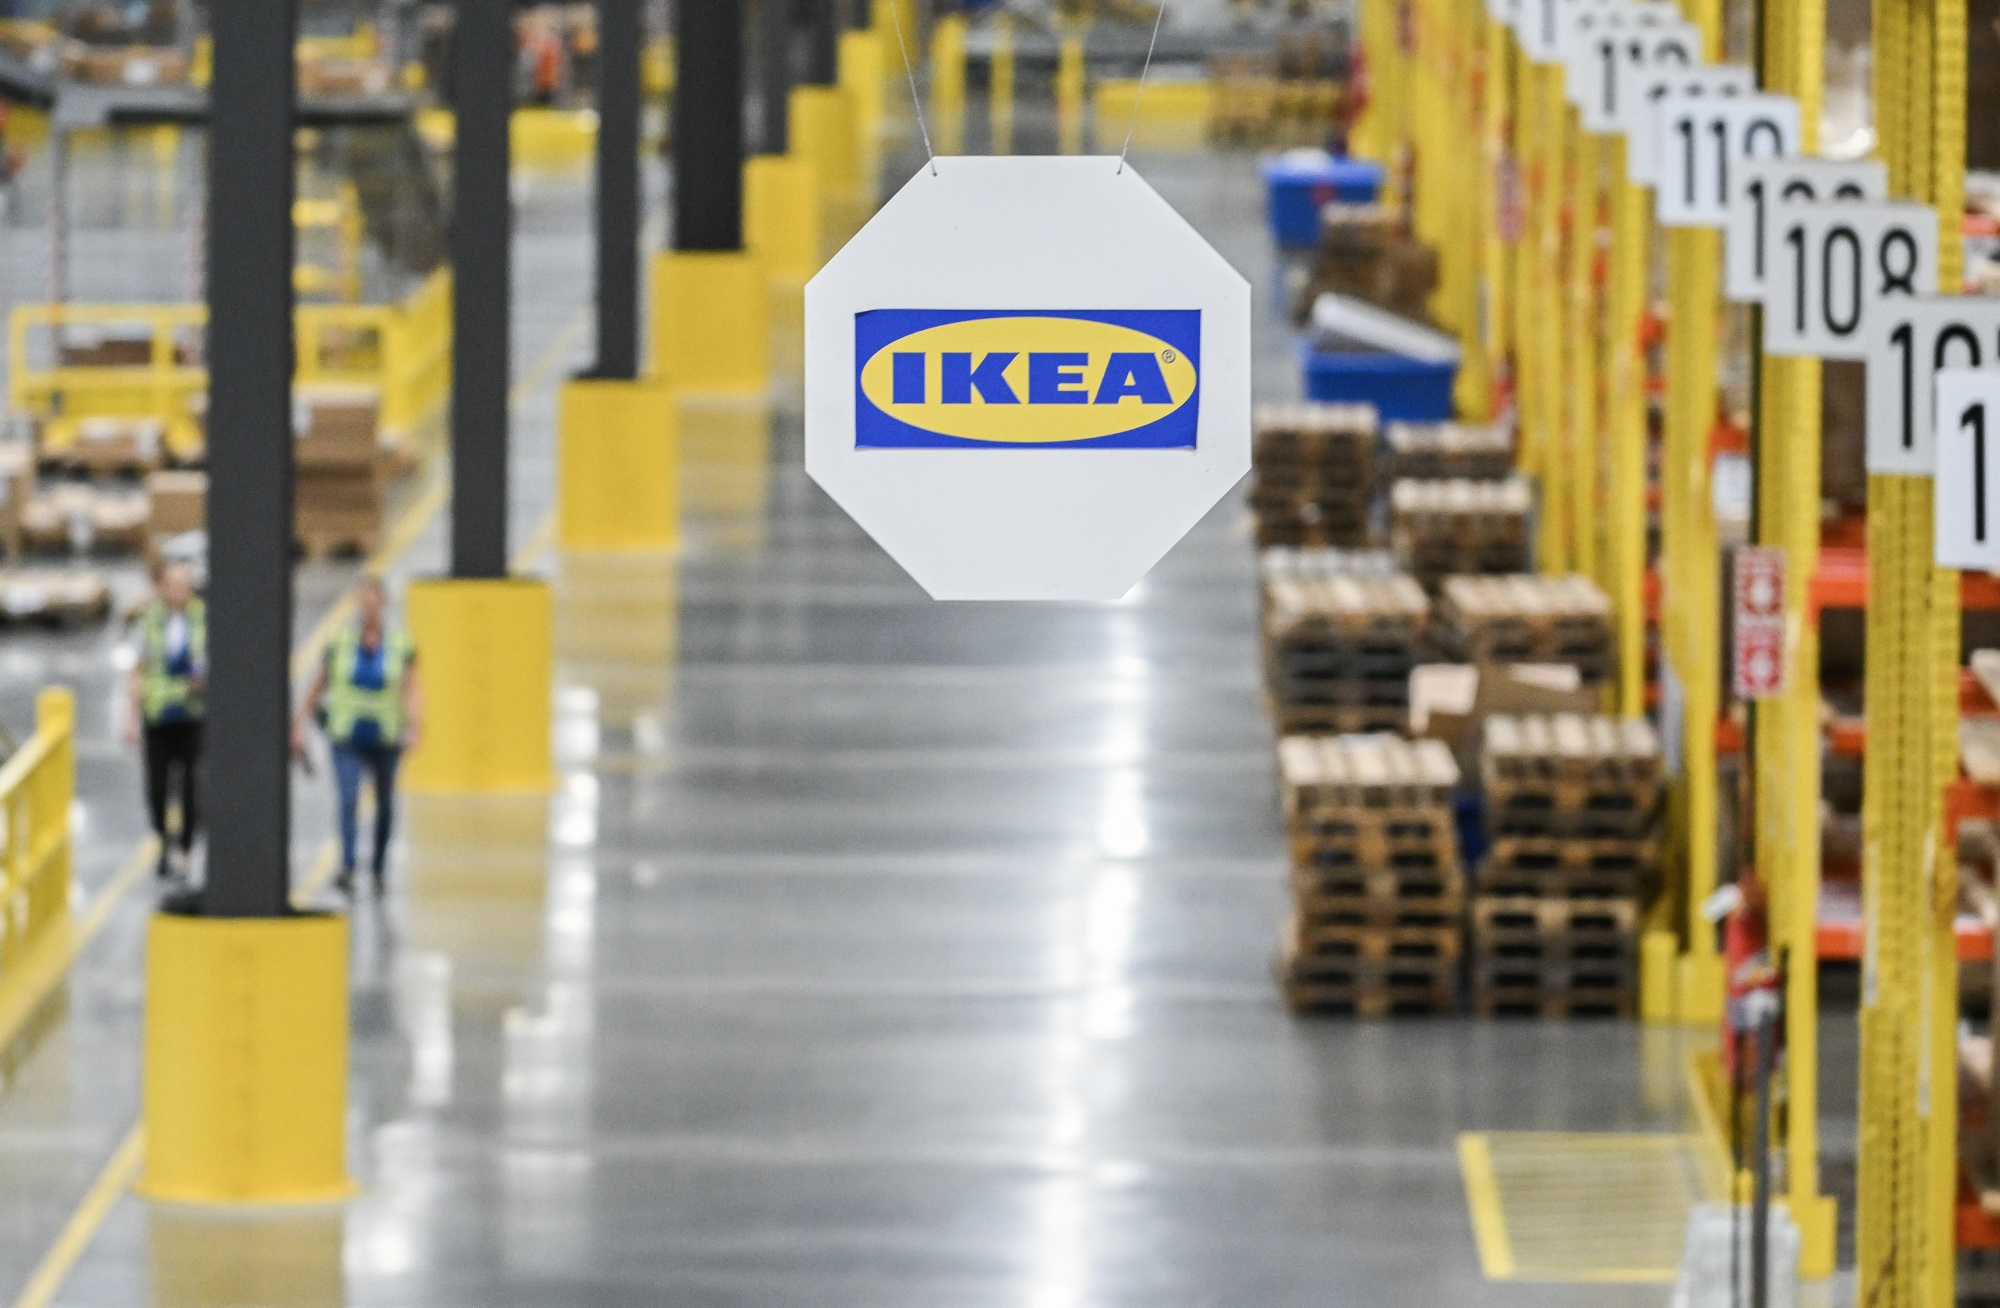 Swedish furniture giant IKEA to hike prices due to supply chain issues